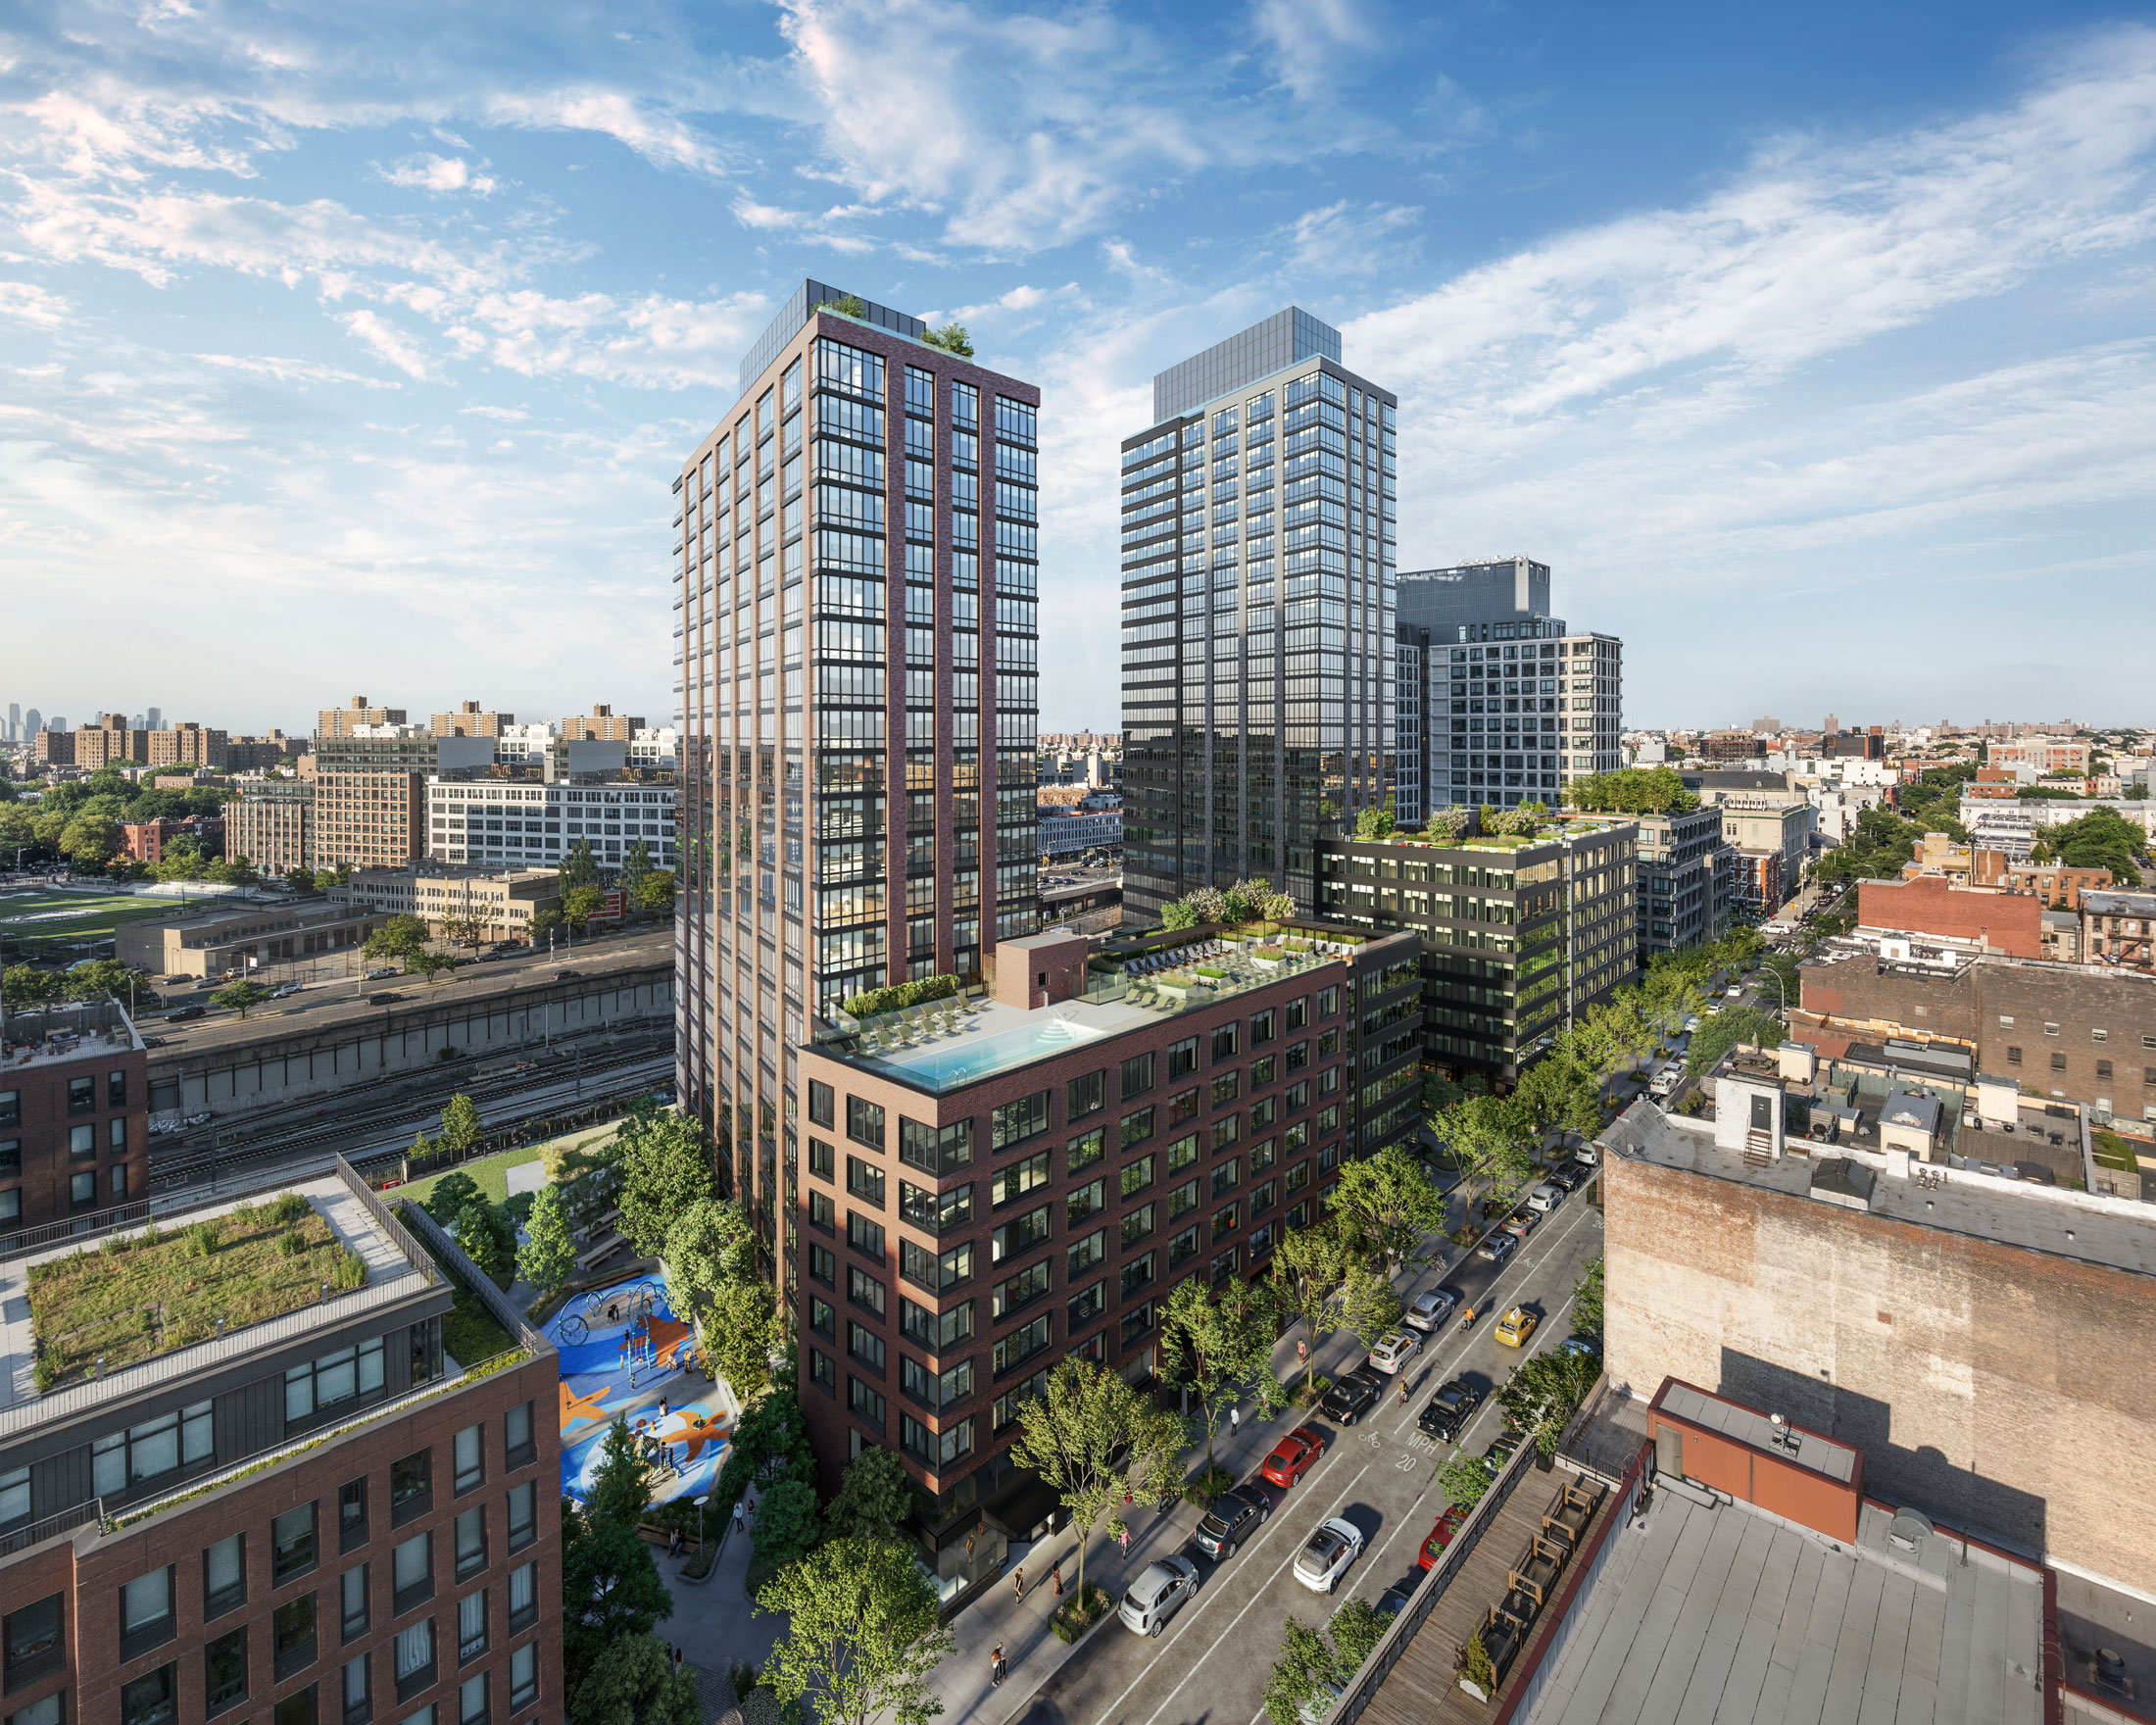 Architectural Rendering of the exterior of the 595 Dean St project located in Brooklyn, New York